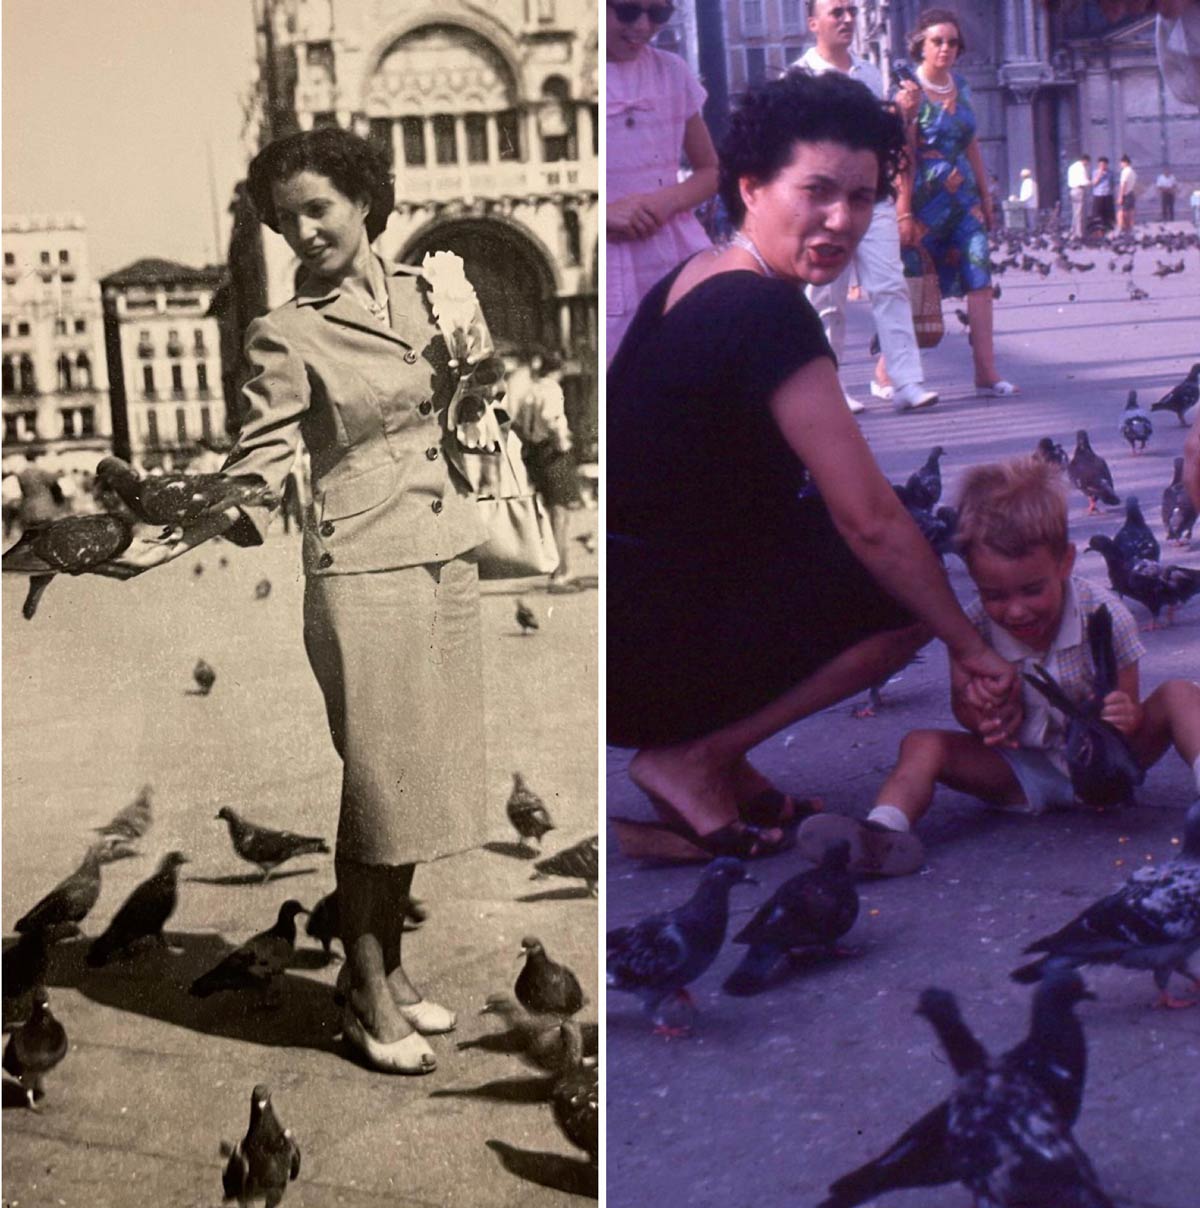 Thinking of having a baby? On the left is a picture of my Nonna enjoying Venice before she had kids. On the right is a picture in the same location a few years later where she was desperately trying to stop my toddler-aged father from publicly executing a pigeon